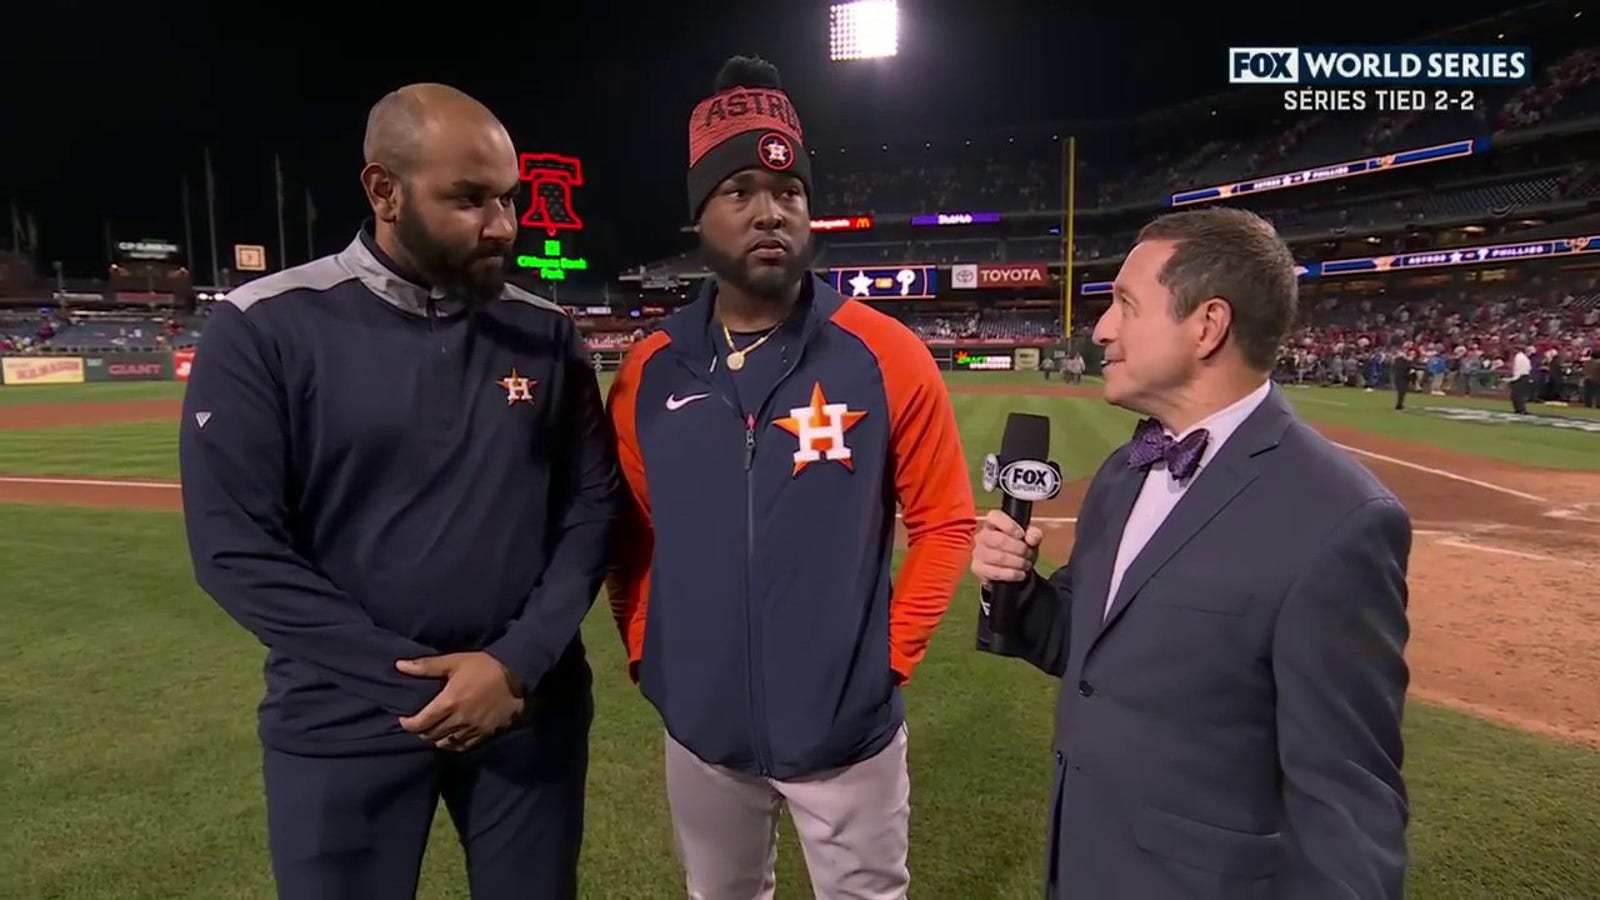 Cristian Javier of the Astros talks about being part of the second no-hitter in World Series history